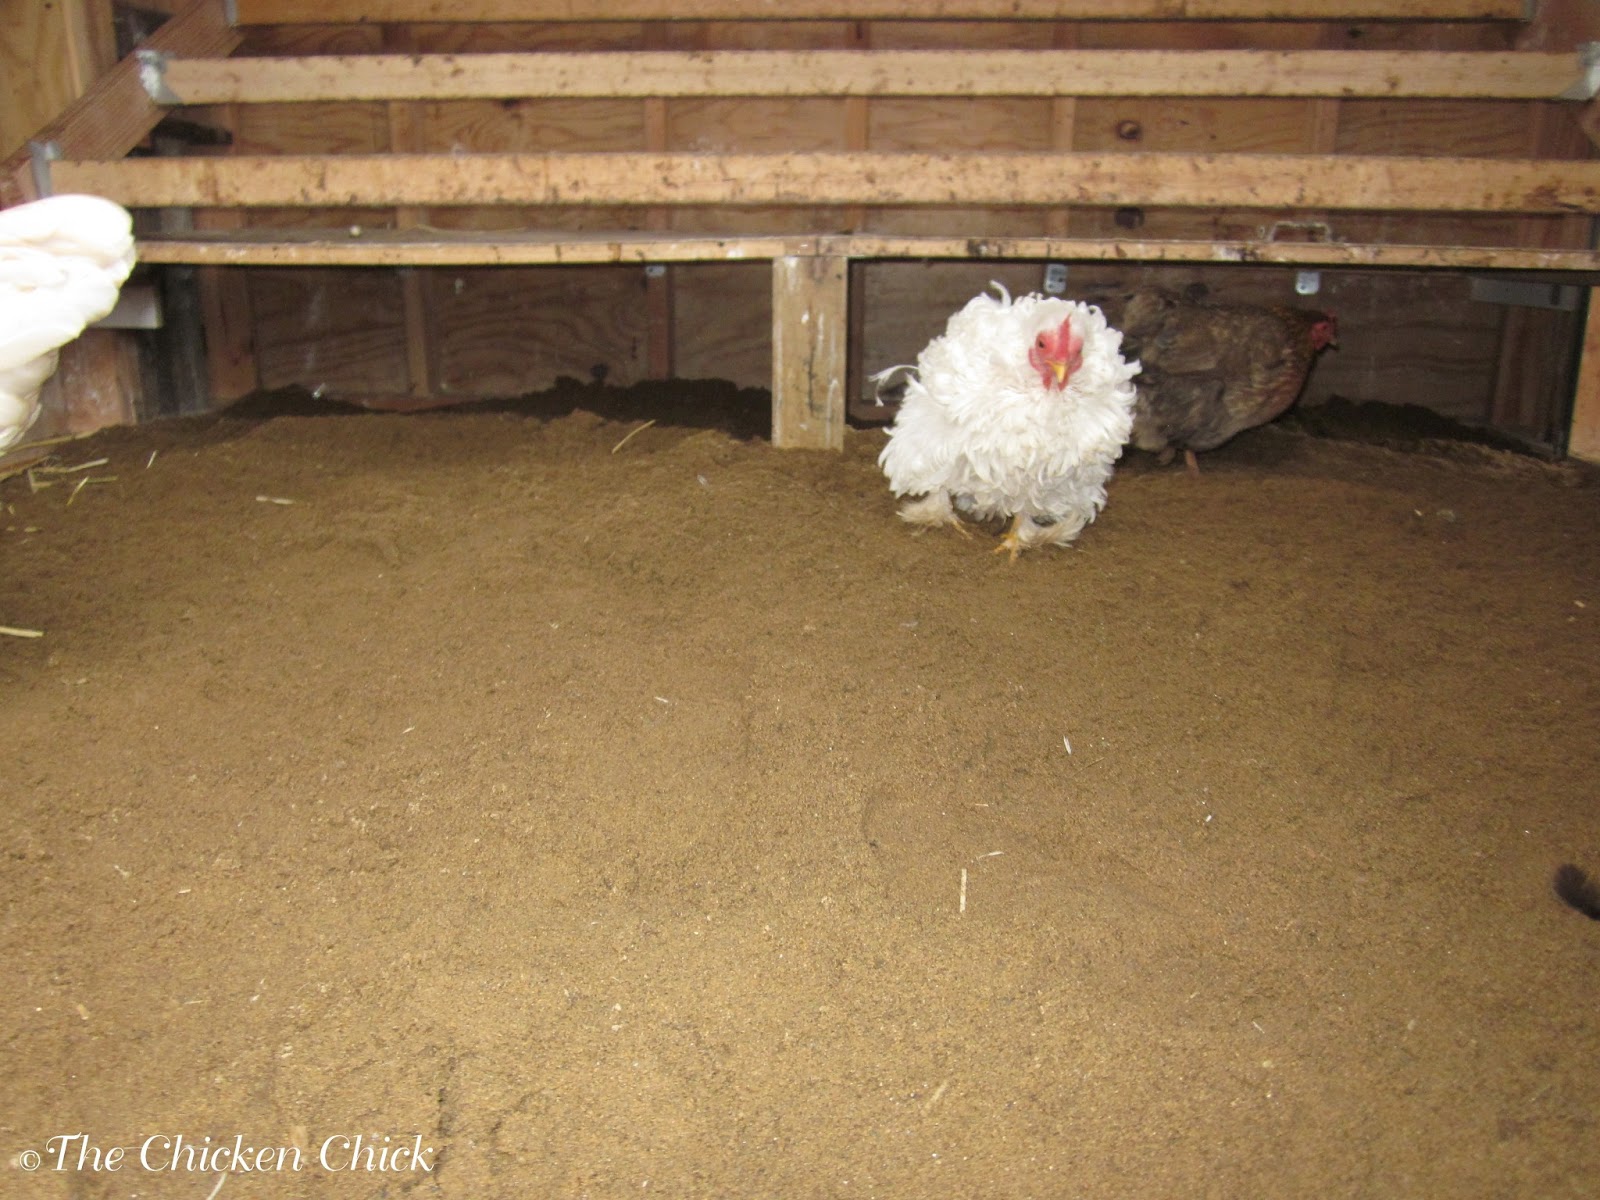 Sand for the Driest Coop Possible: Use sand as chicken coop litter and 